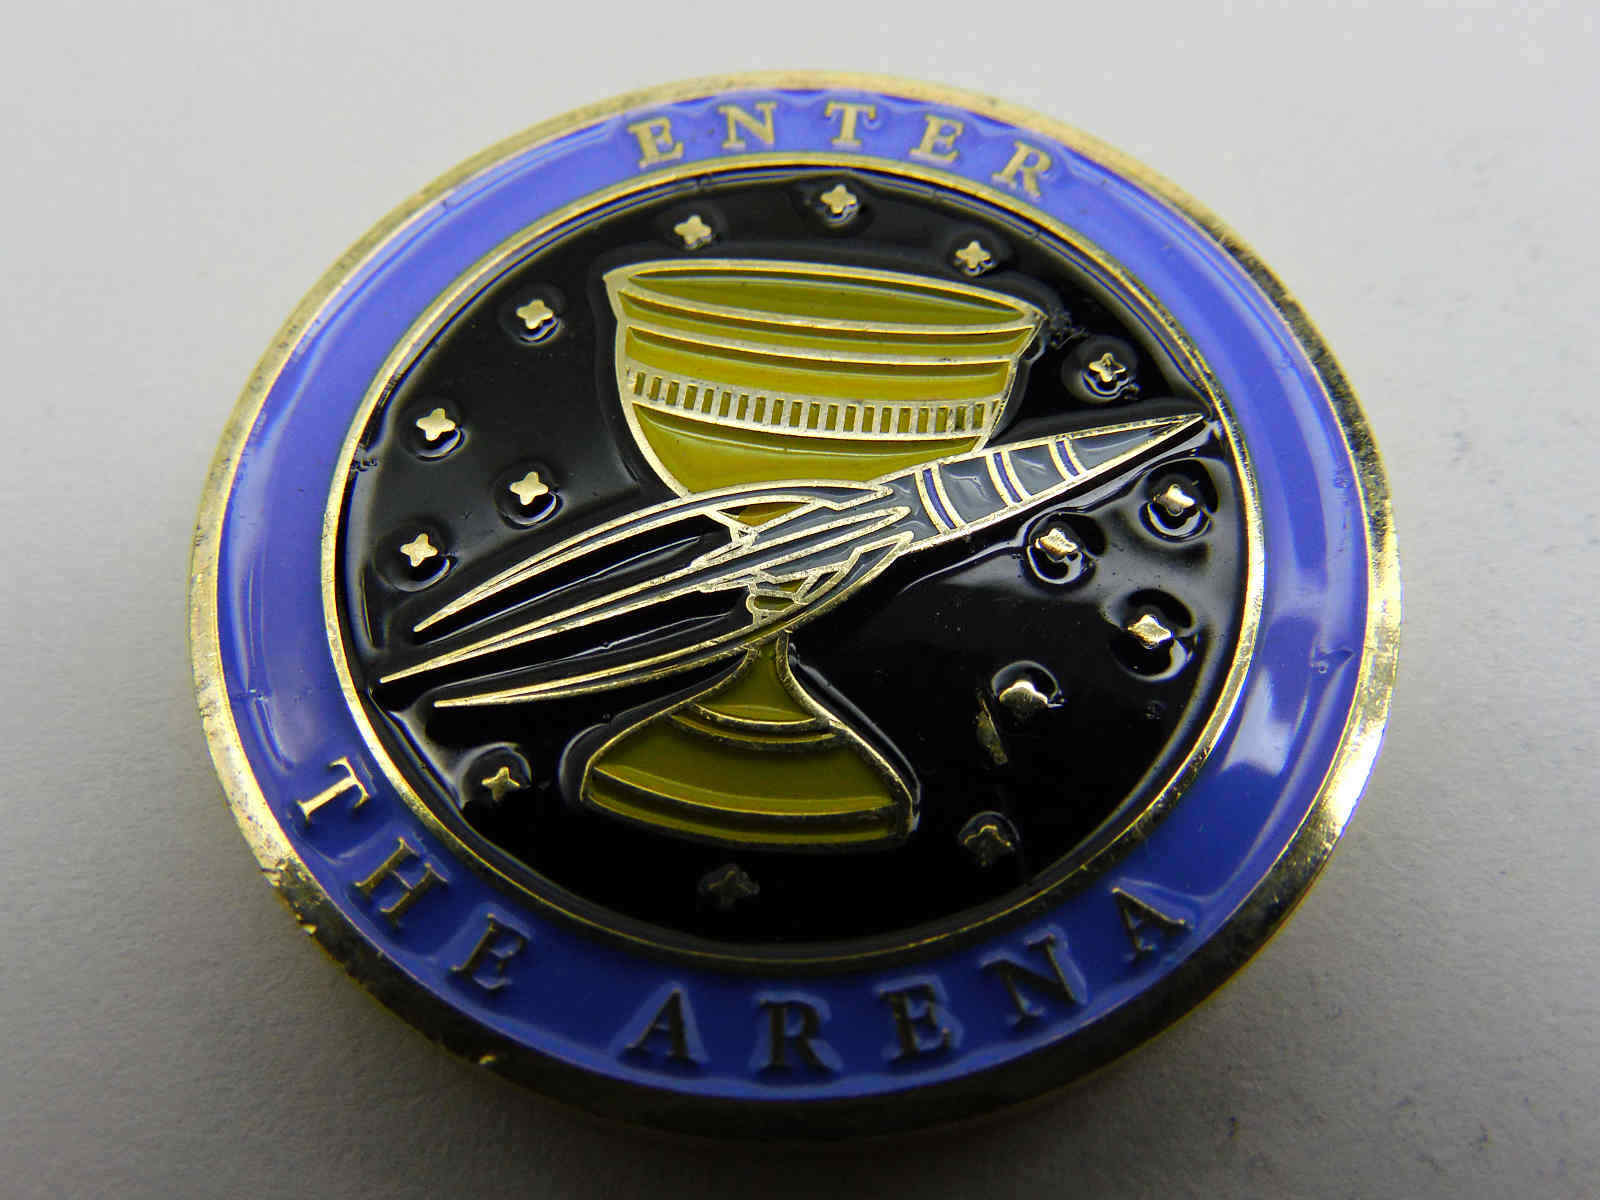 THE ARENA ENTER CHALLENGE COIN